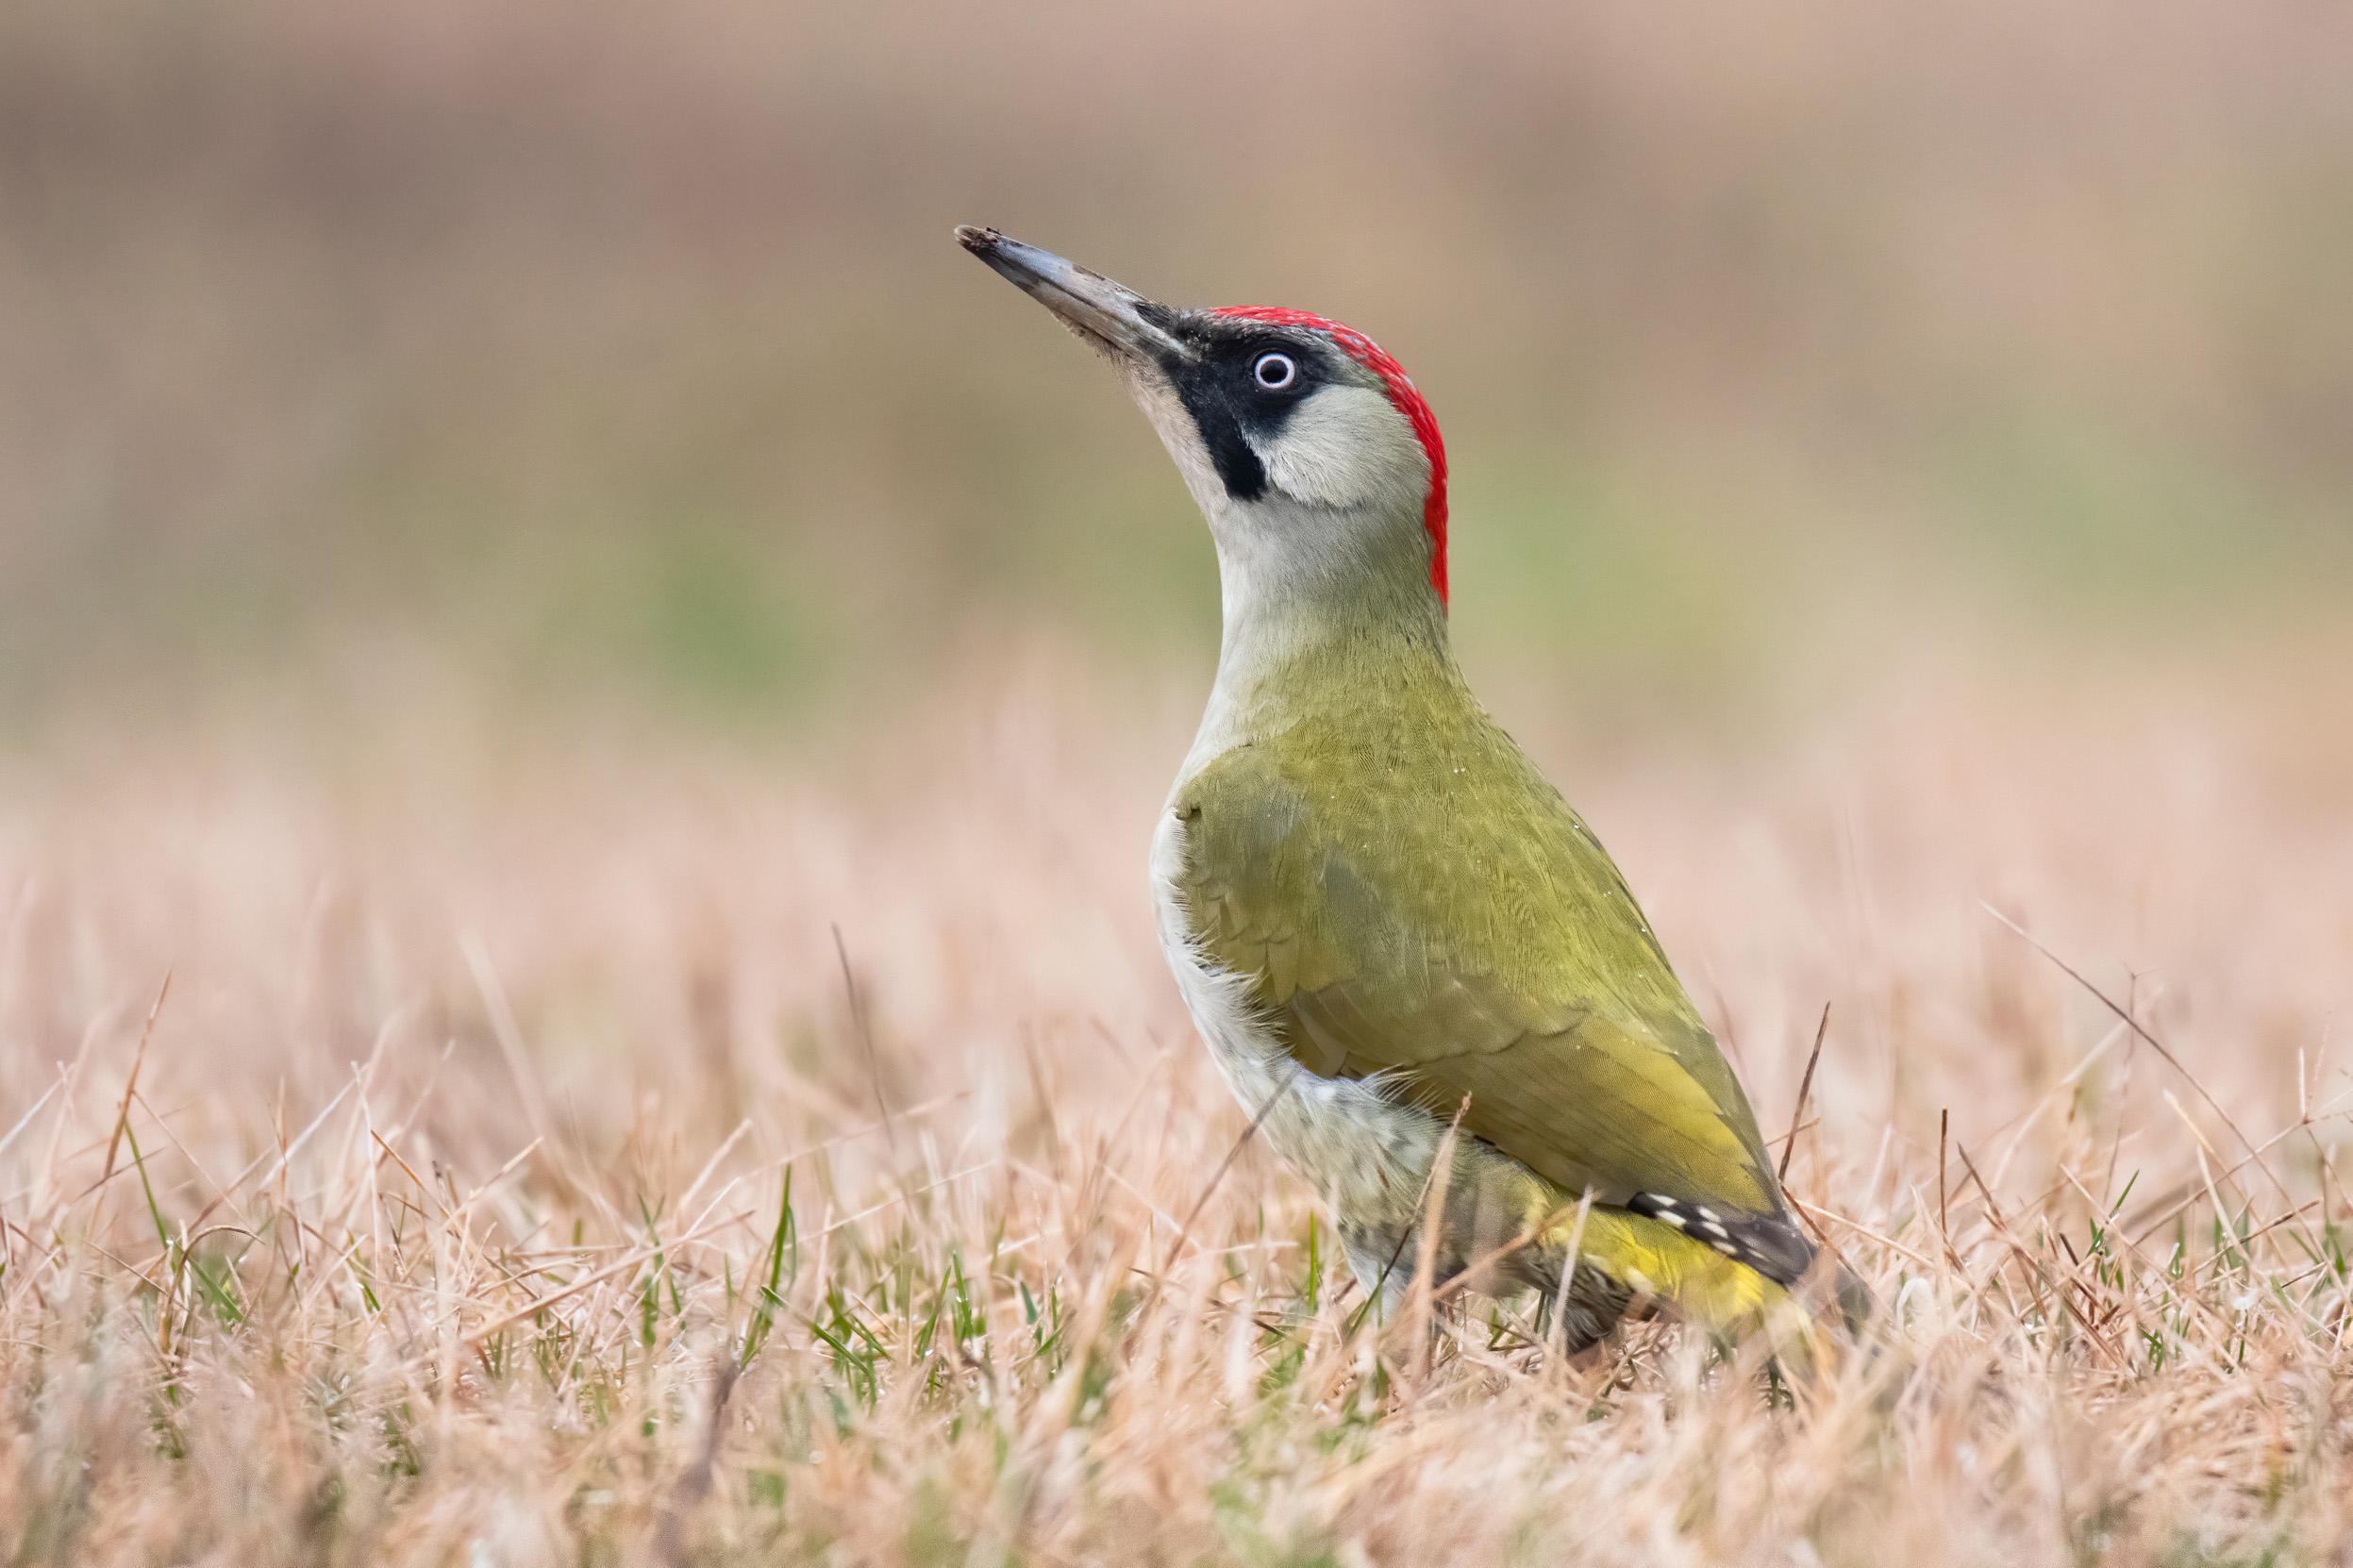 A female Green Woodpecker looking to the sky perched on a patch of dry grass.